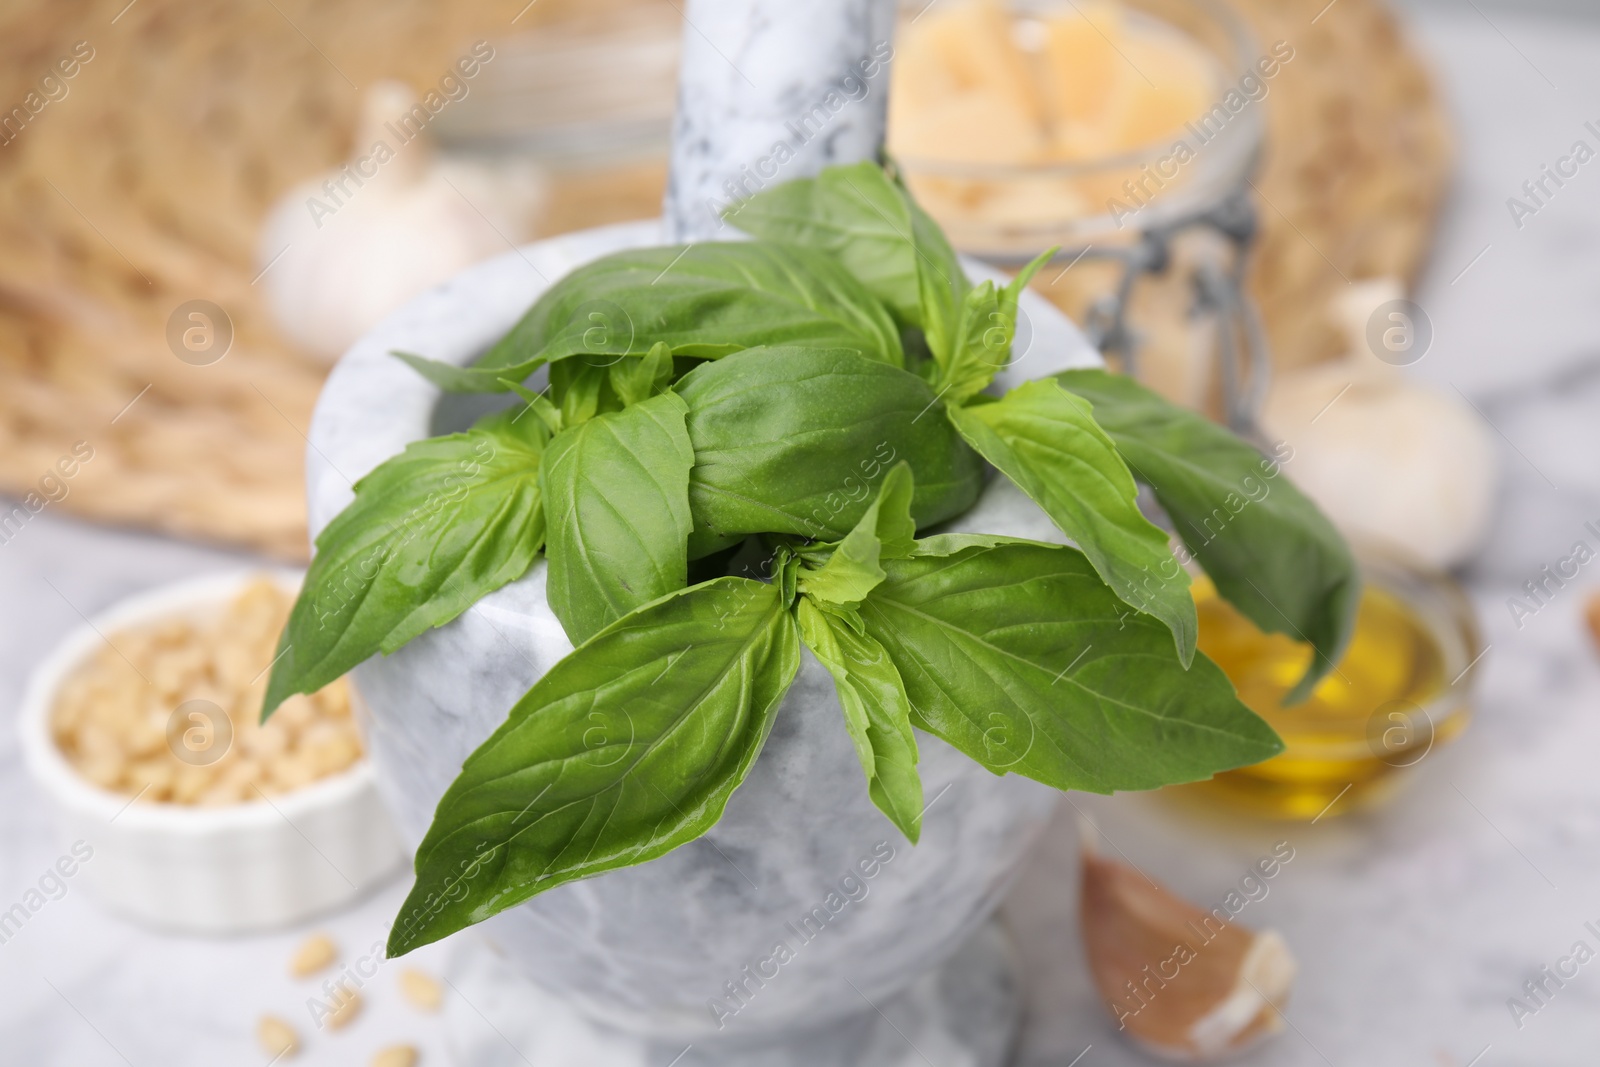 Photo of Fresh basil in mortar on table, closeup. Ingredients for pesto sauce